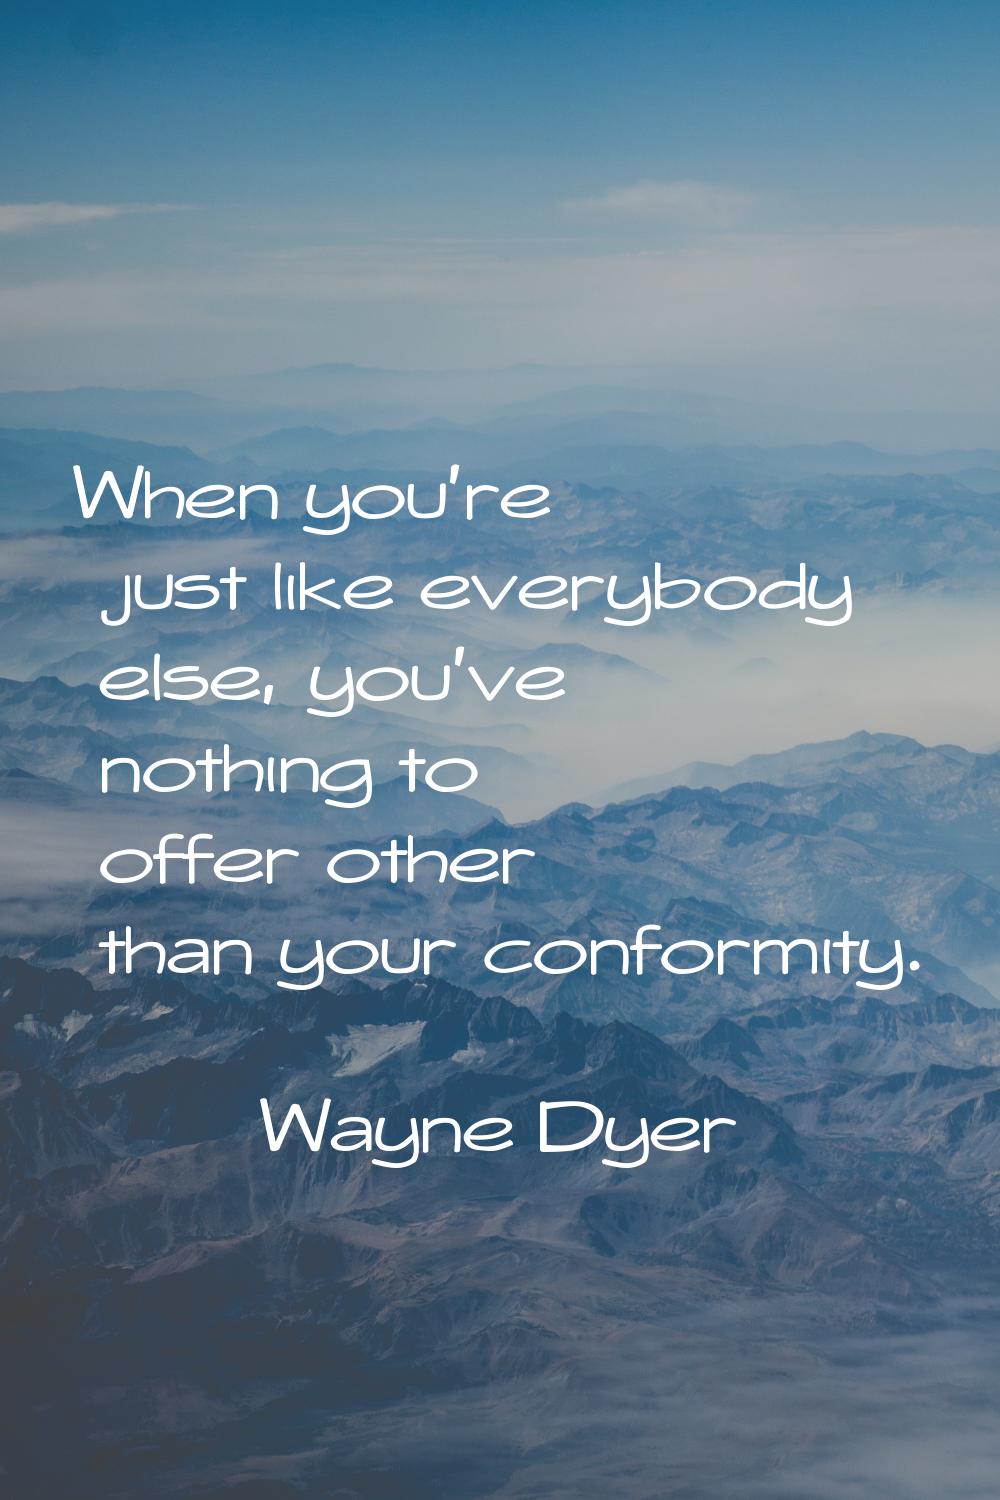 When you're just like everybody else, you've nothing to offer other than your conformity.